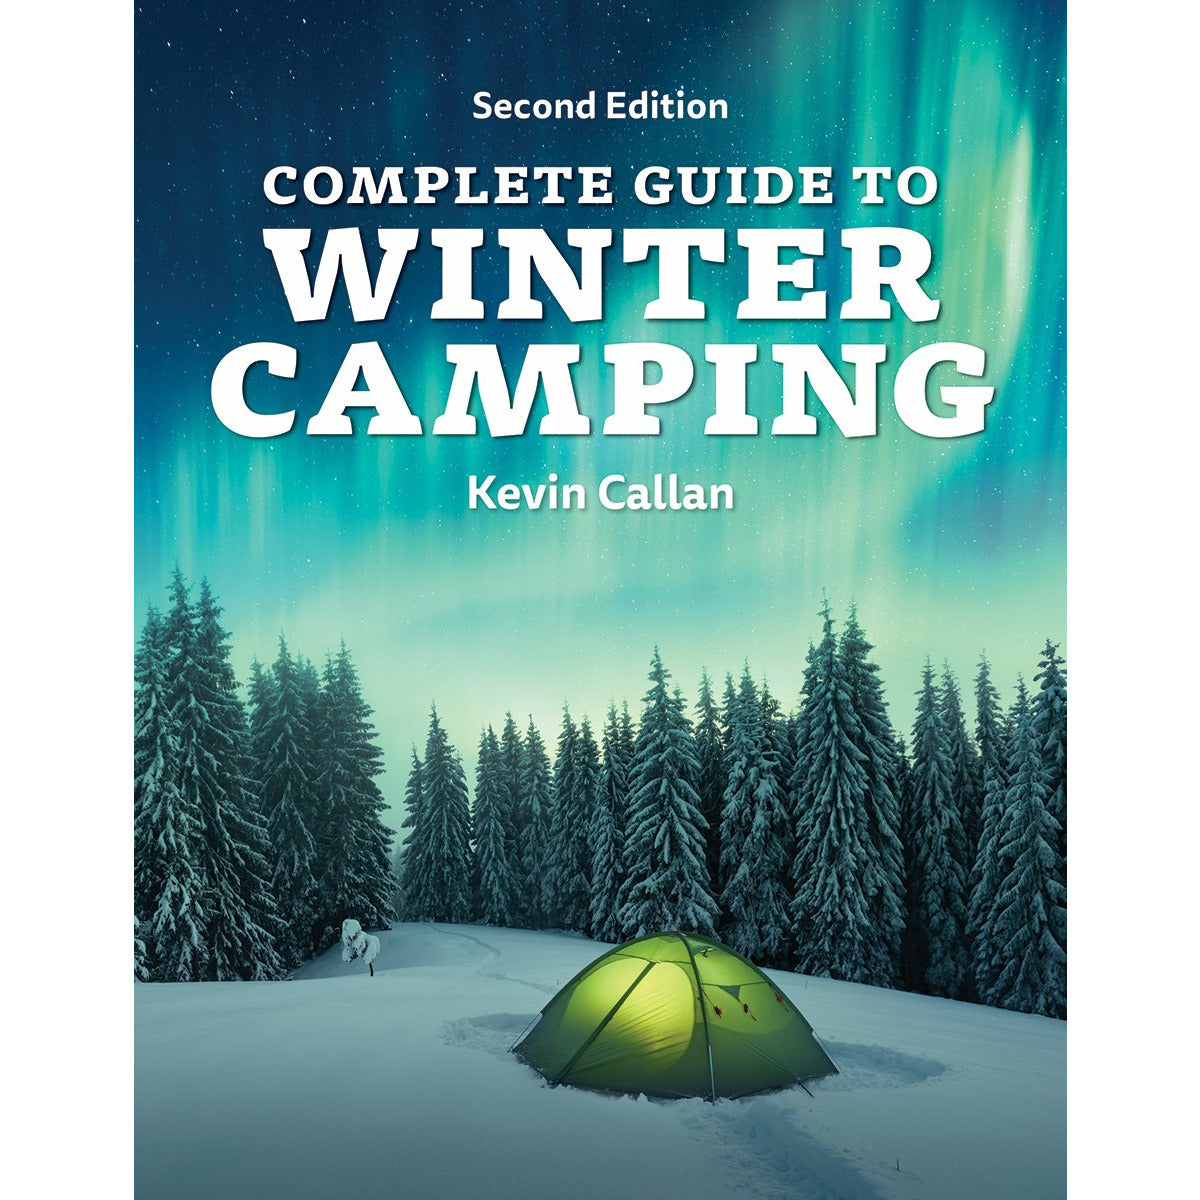 Complete Guide to Winter Camping - 2nd Edition